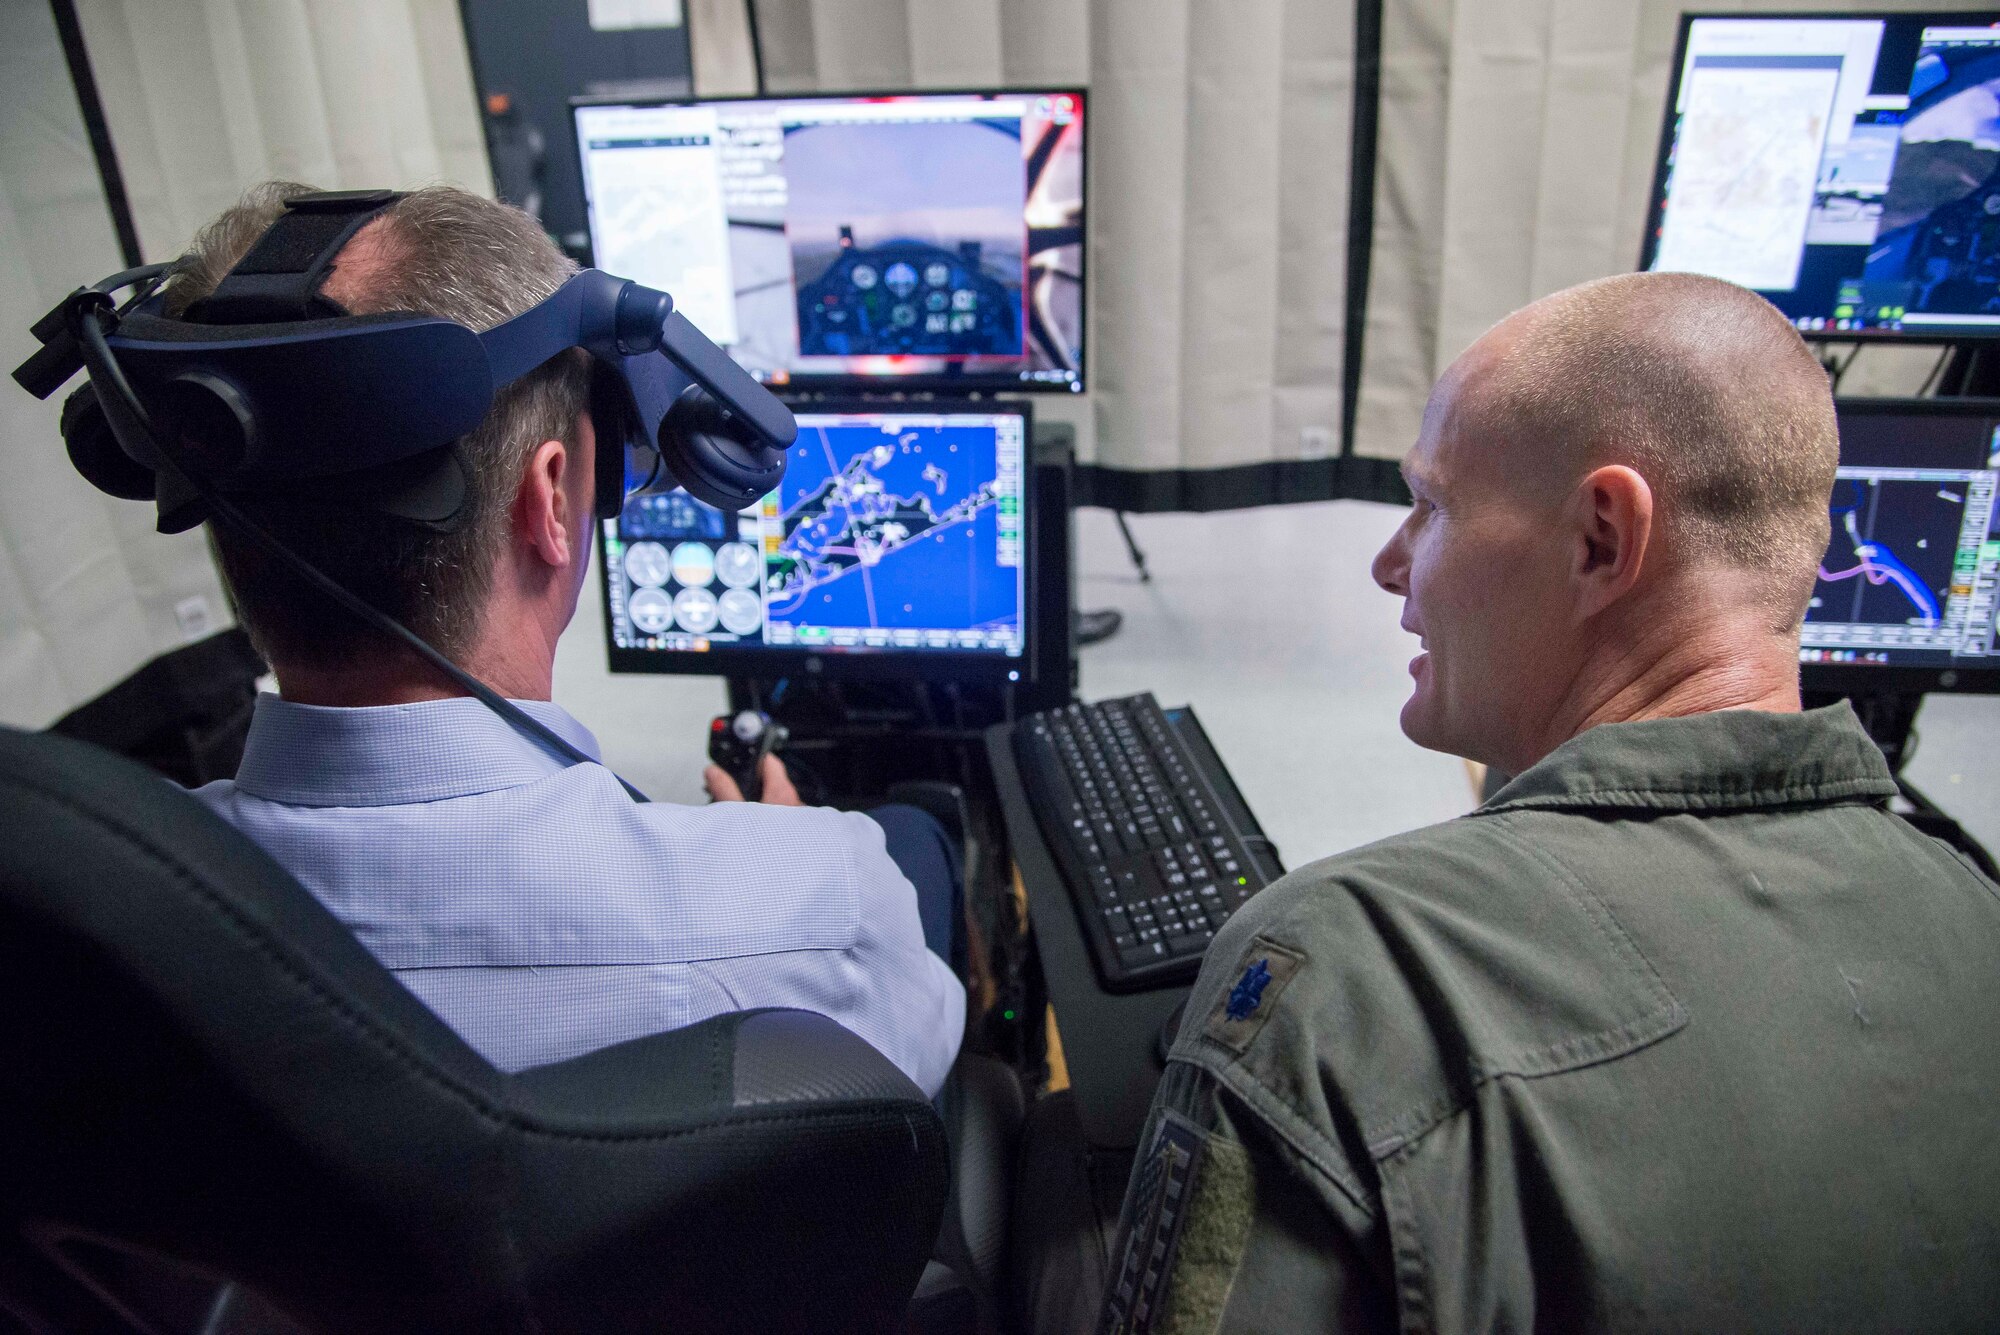 Royal Air Force Air Marshall Sean Reynolds (left), senior officer responsible for personnel and capability of the United Kingdom’s RAF and U.S. Air Force Lt. Col. Robert Vicars, Pilot Training Next initiative director, go through a flight simulator at the Pilot Training Next detachment in Austin, Texas, May 3, 2018. Reynolds’ visit involved a tour of PTN facilities to better understand how Air Education and Training Command uses existing and emerging technologies to decrease the time and cost of training, without sacrificing depth of learning and strengthened partnerships through the sharing of best practices and mutual interests. (U.S. Air Force photo by Sean Worrell)